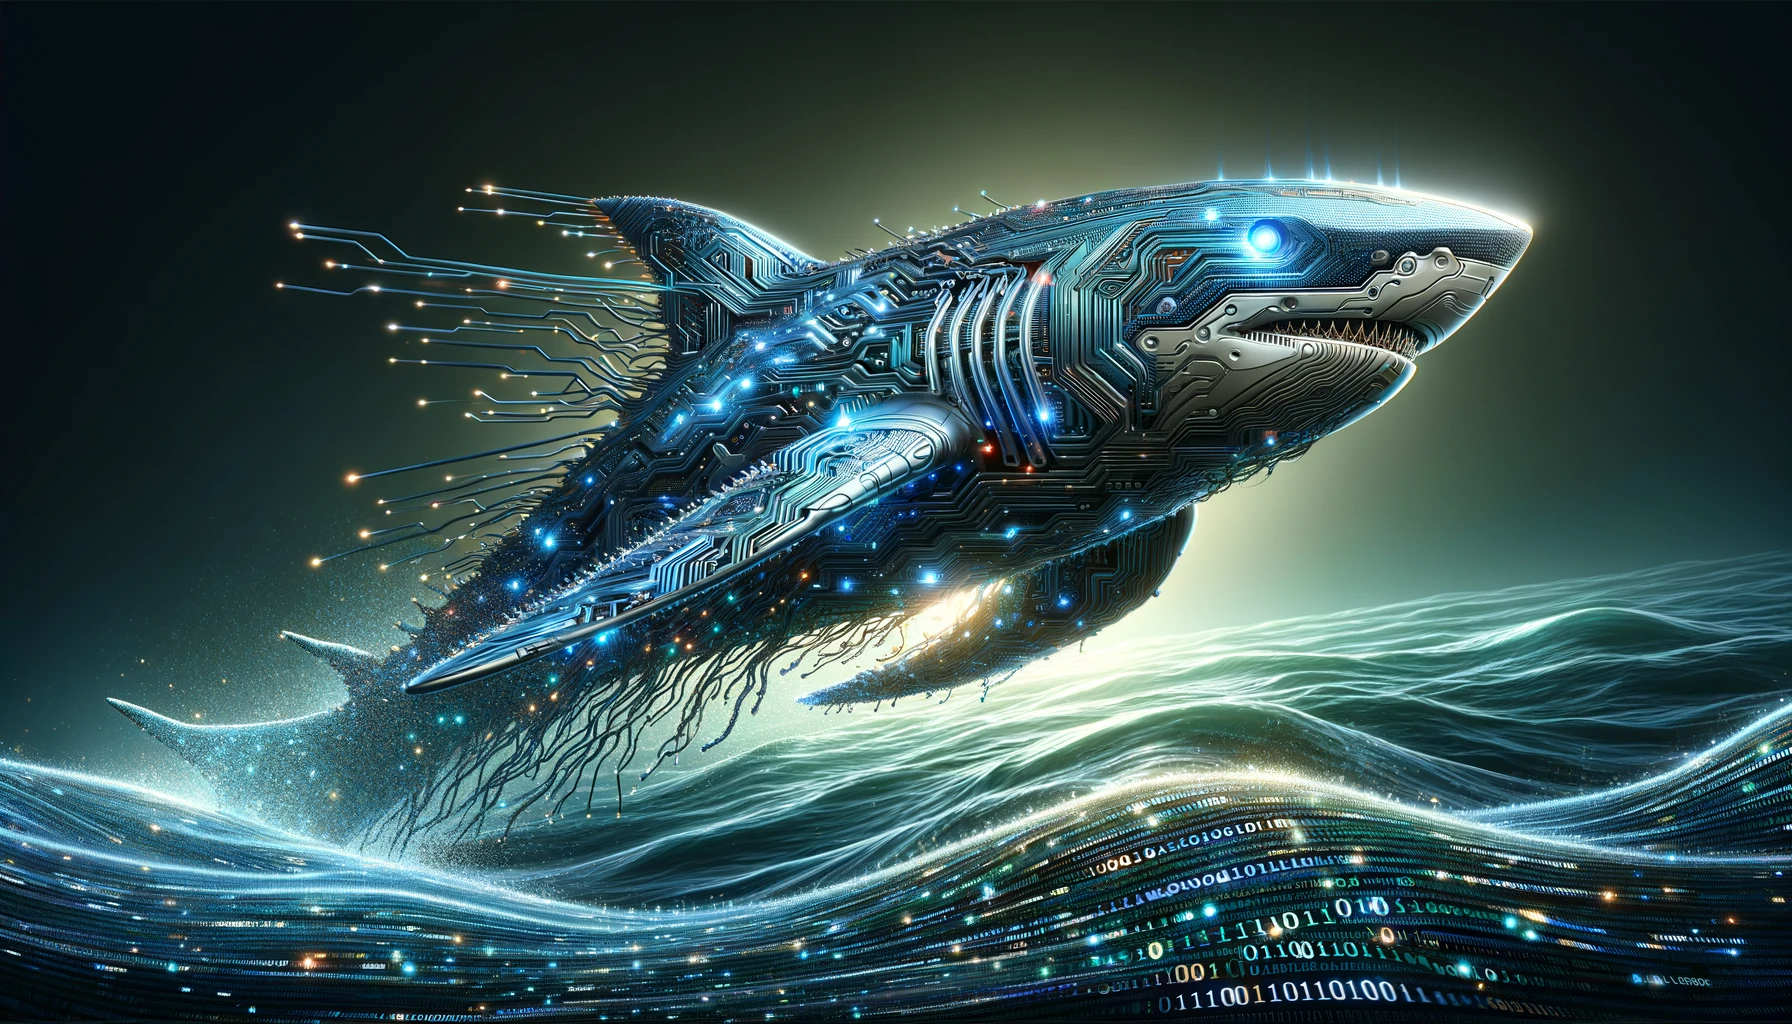 Code Shark: A sleek, metallic shark emerging from a sea of binary code, with glowing circuits and lines of code running along its body